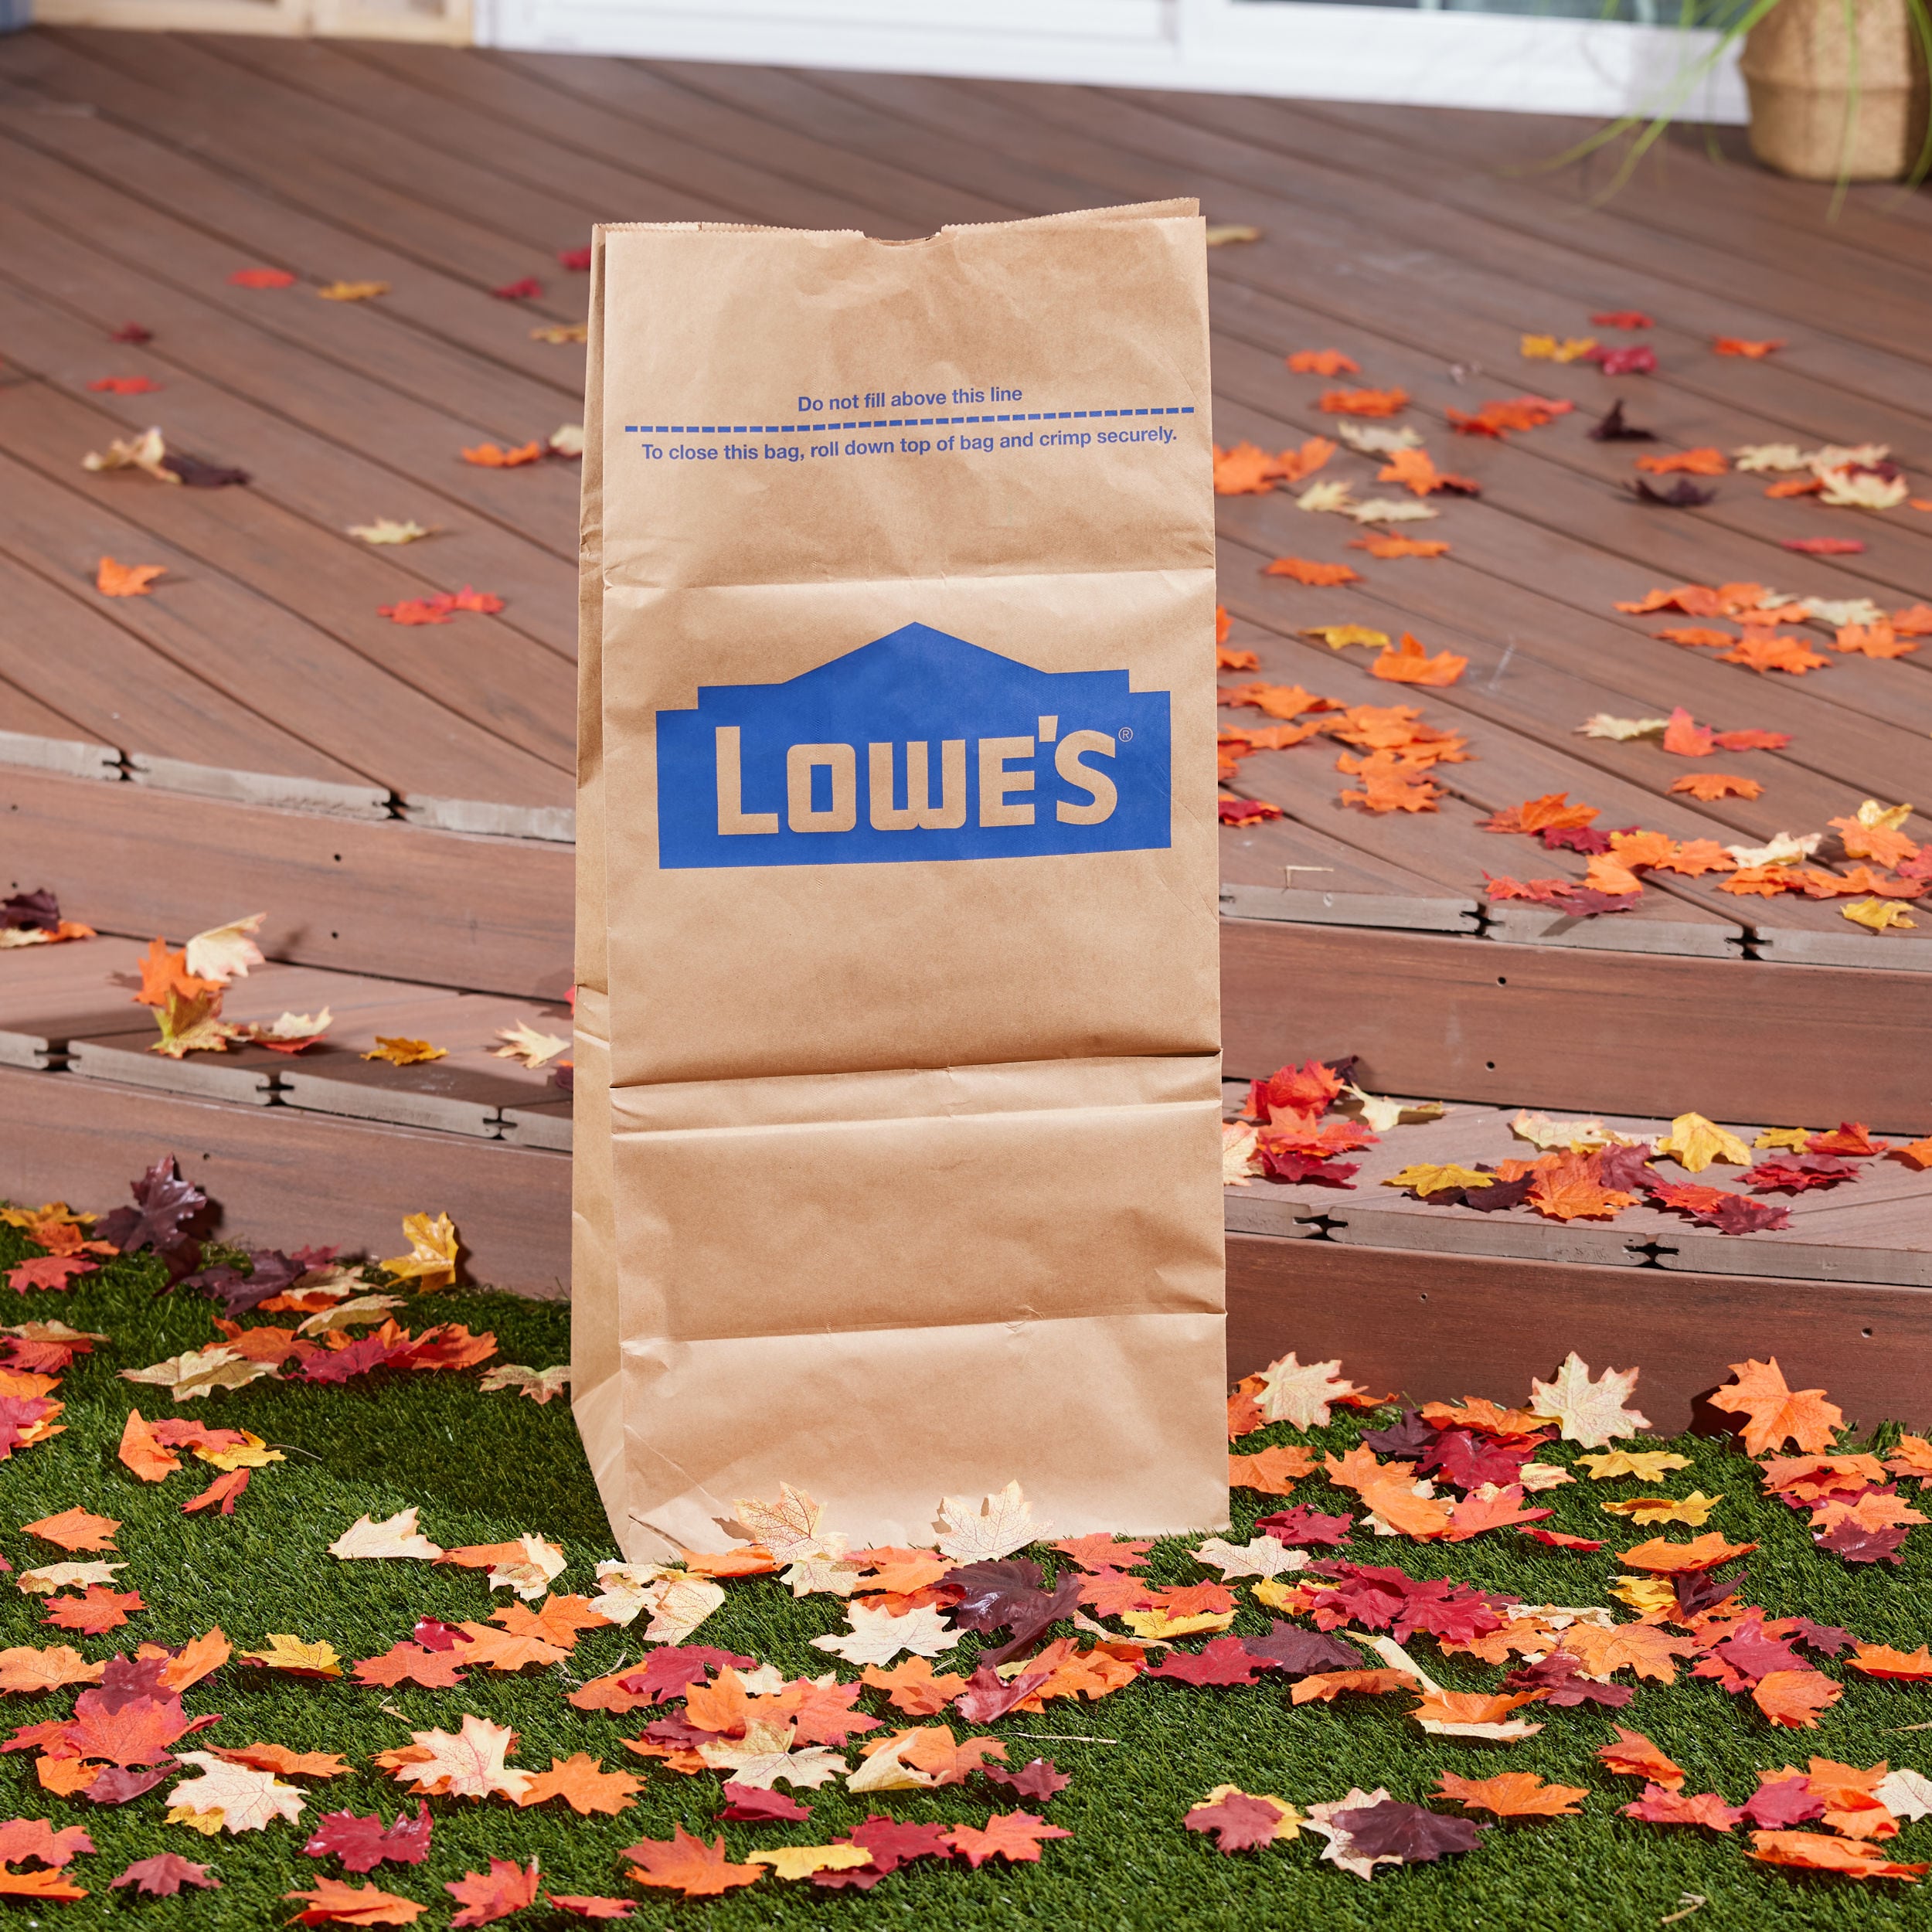 30 Gallon Kraft Lawn and Leaf Bags (5 Pack) Eco-Friendly Heavy